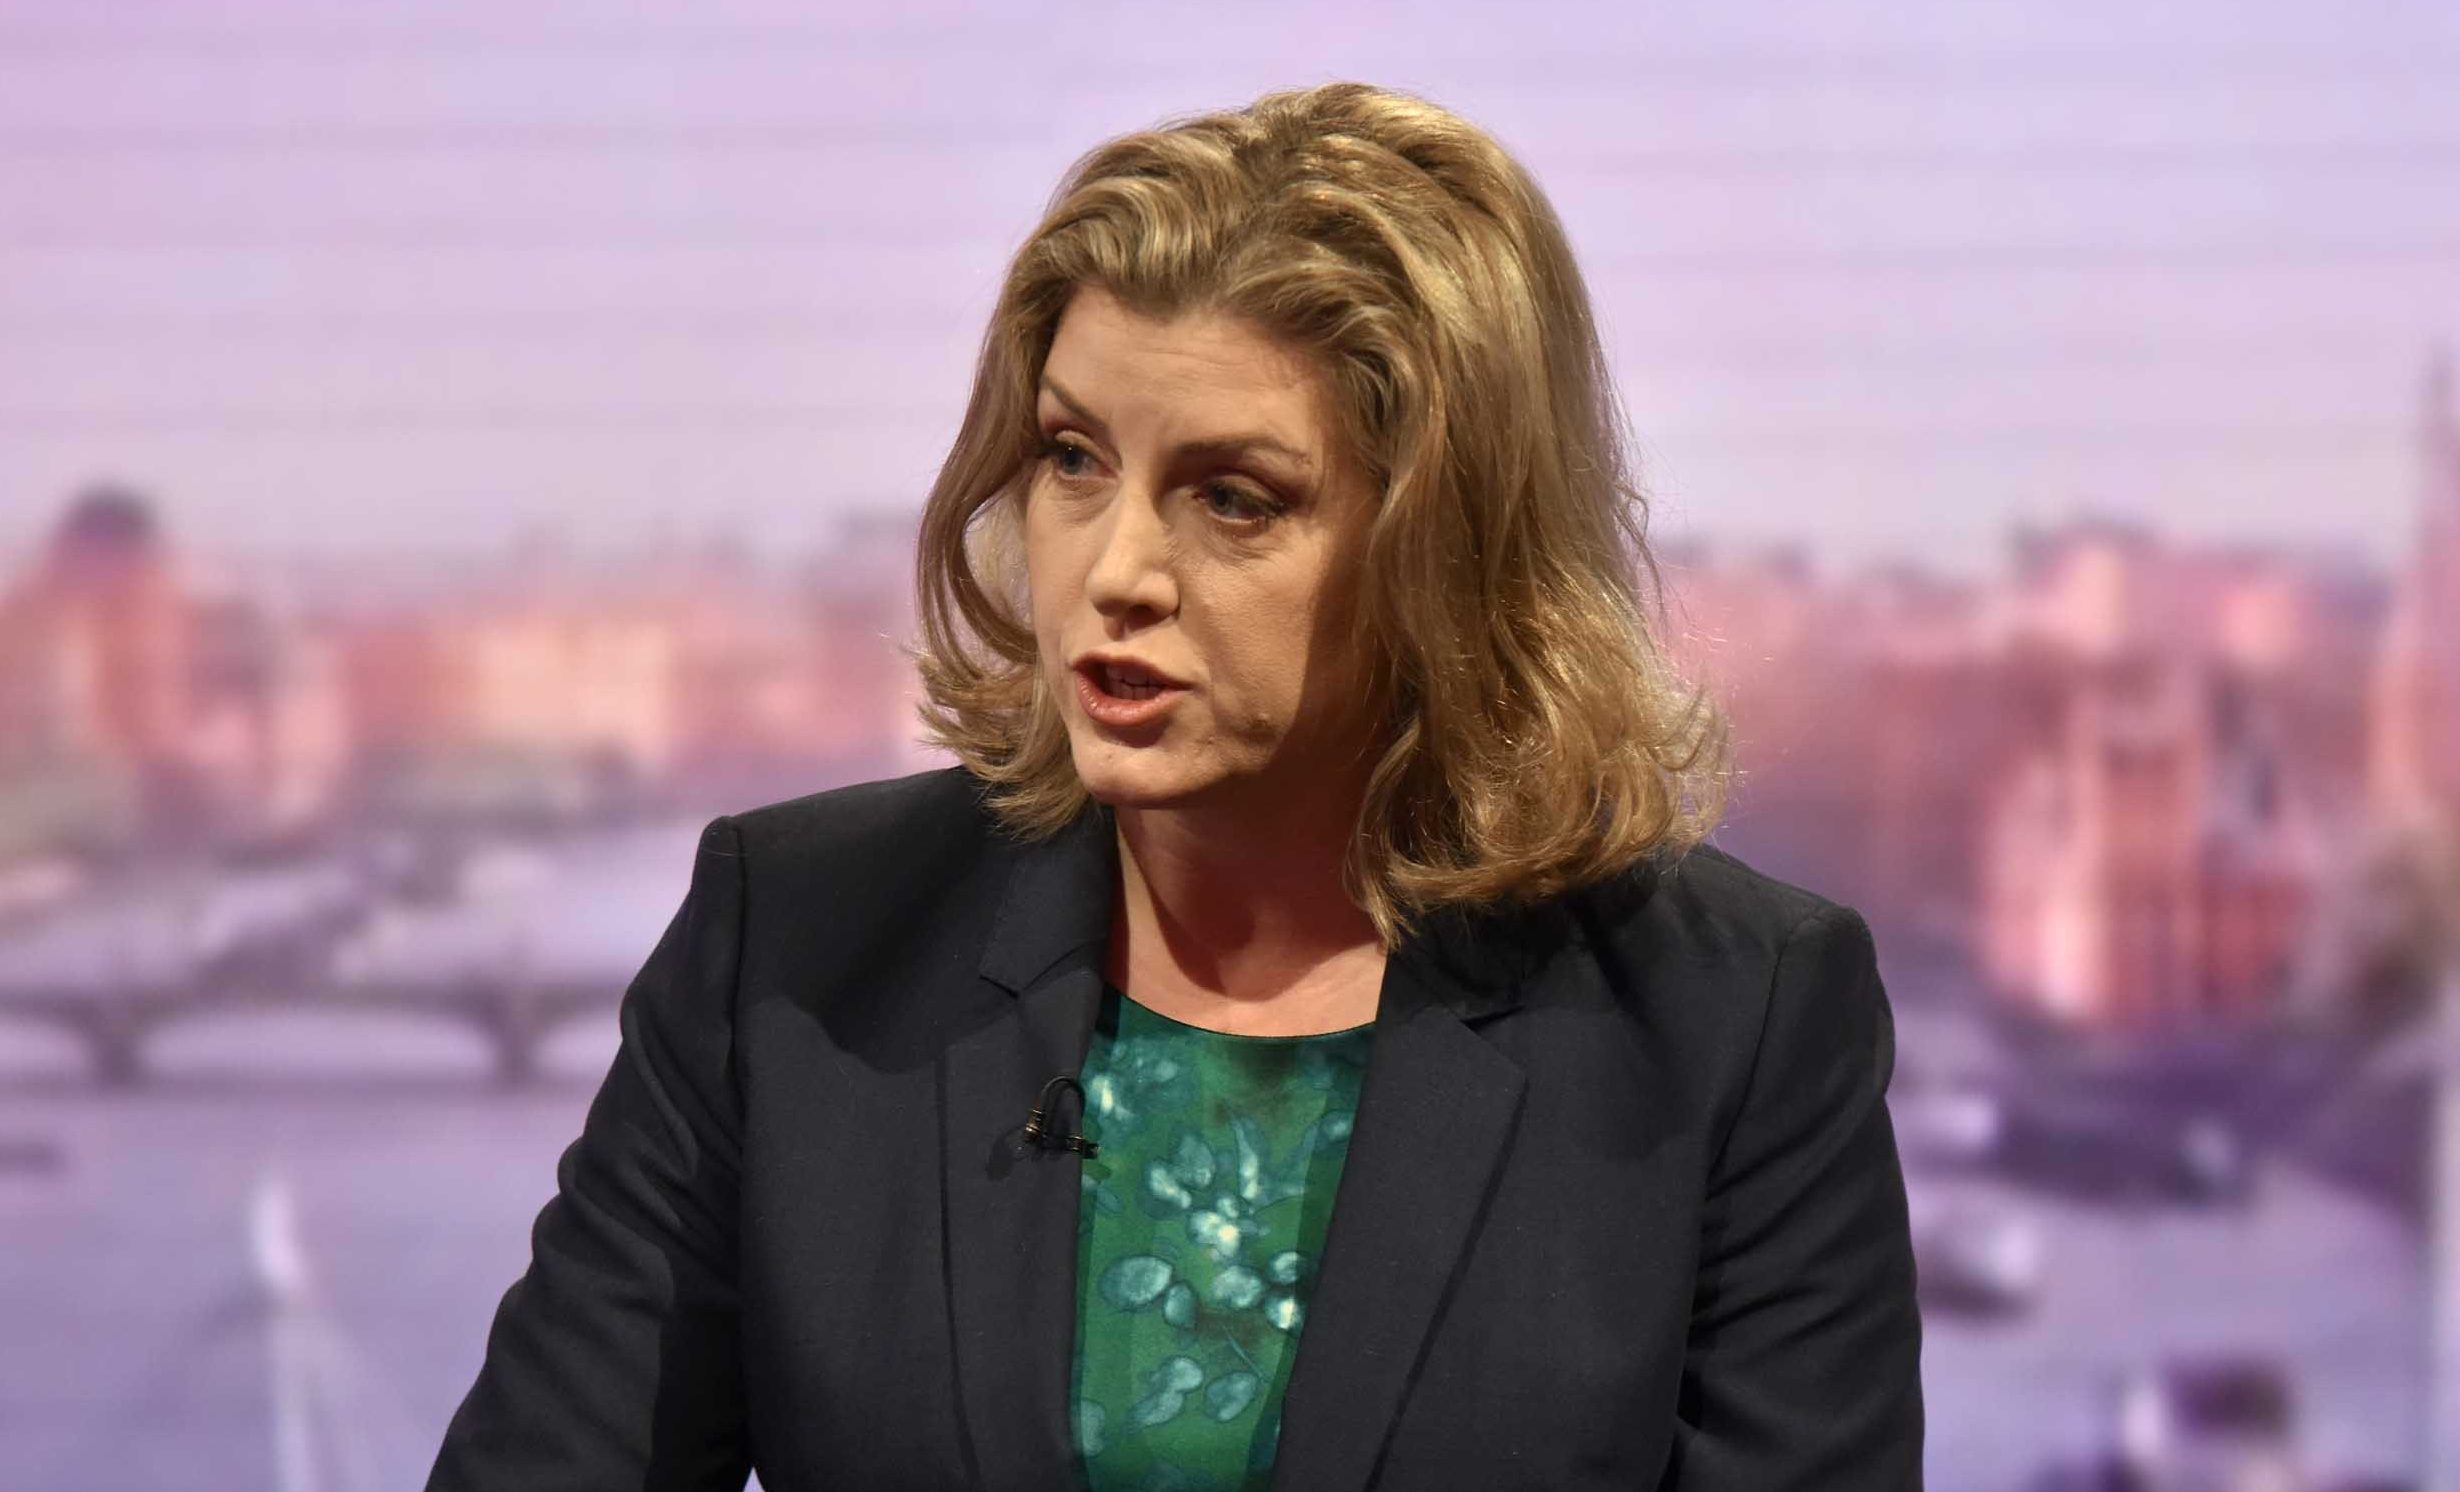 International development secretary Penny Mordaunt called the sexual exploitation of vulnerable people by aid workers “grotesque”.